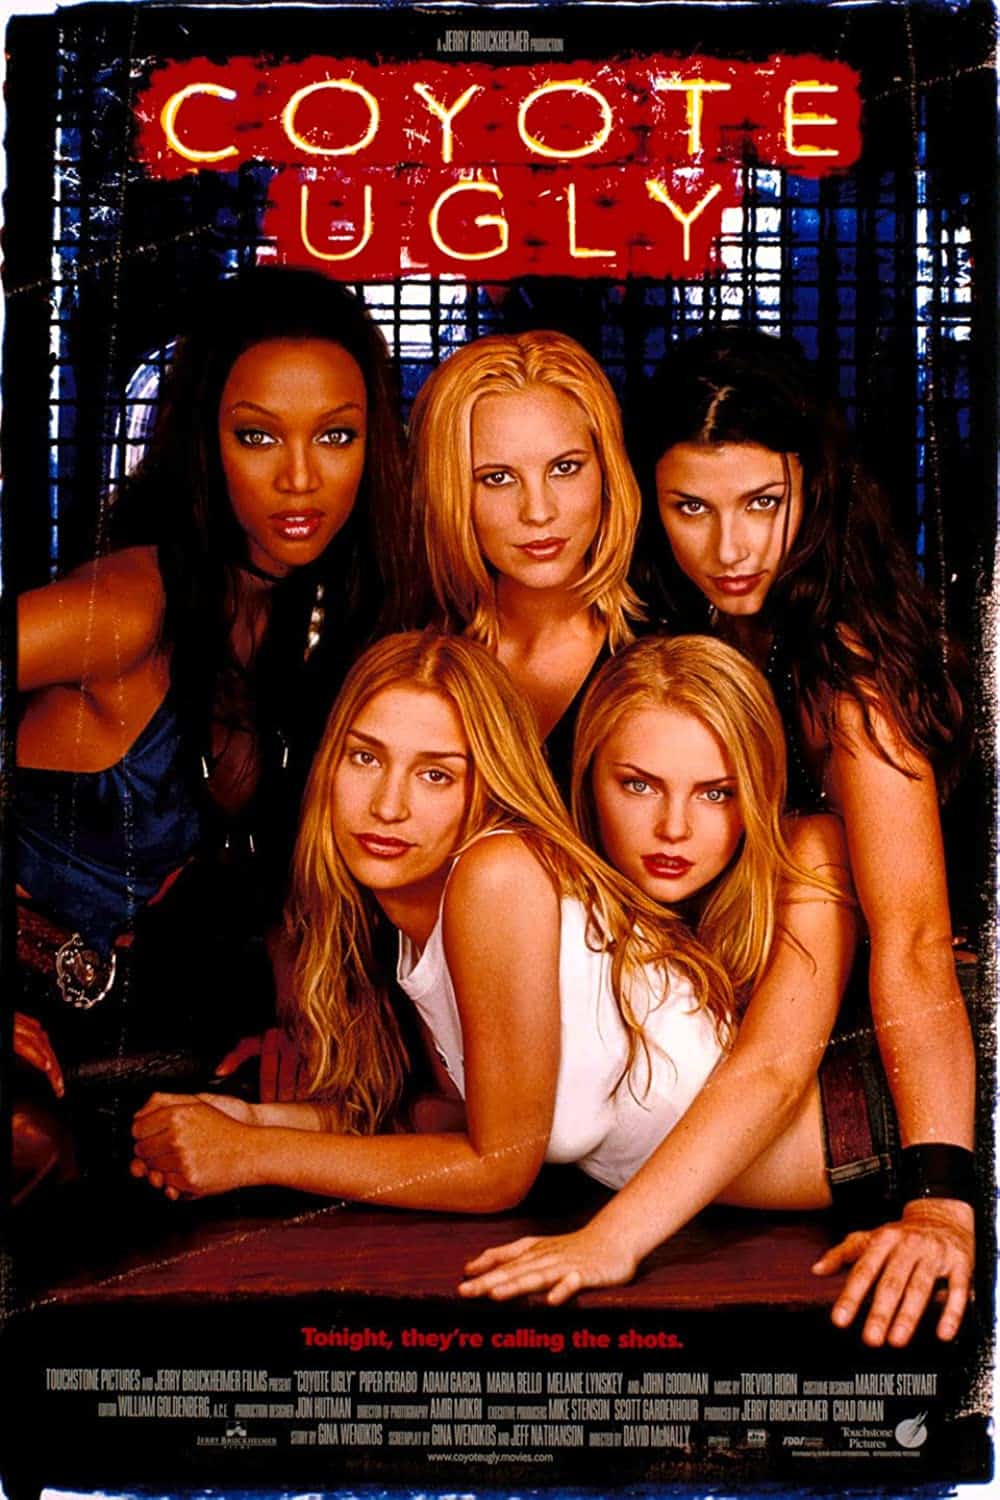 Coyote Ugly (2000) Movie Poster